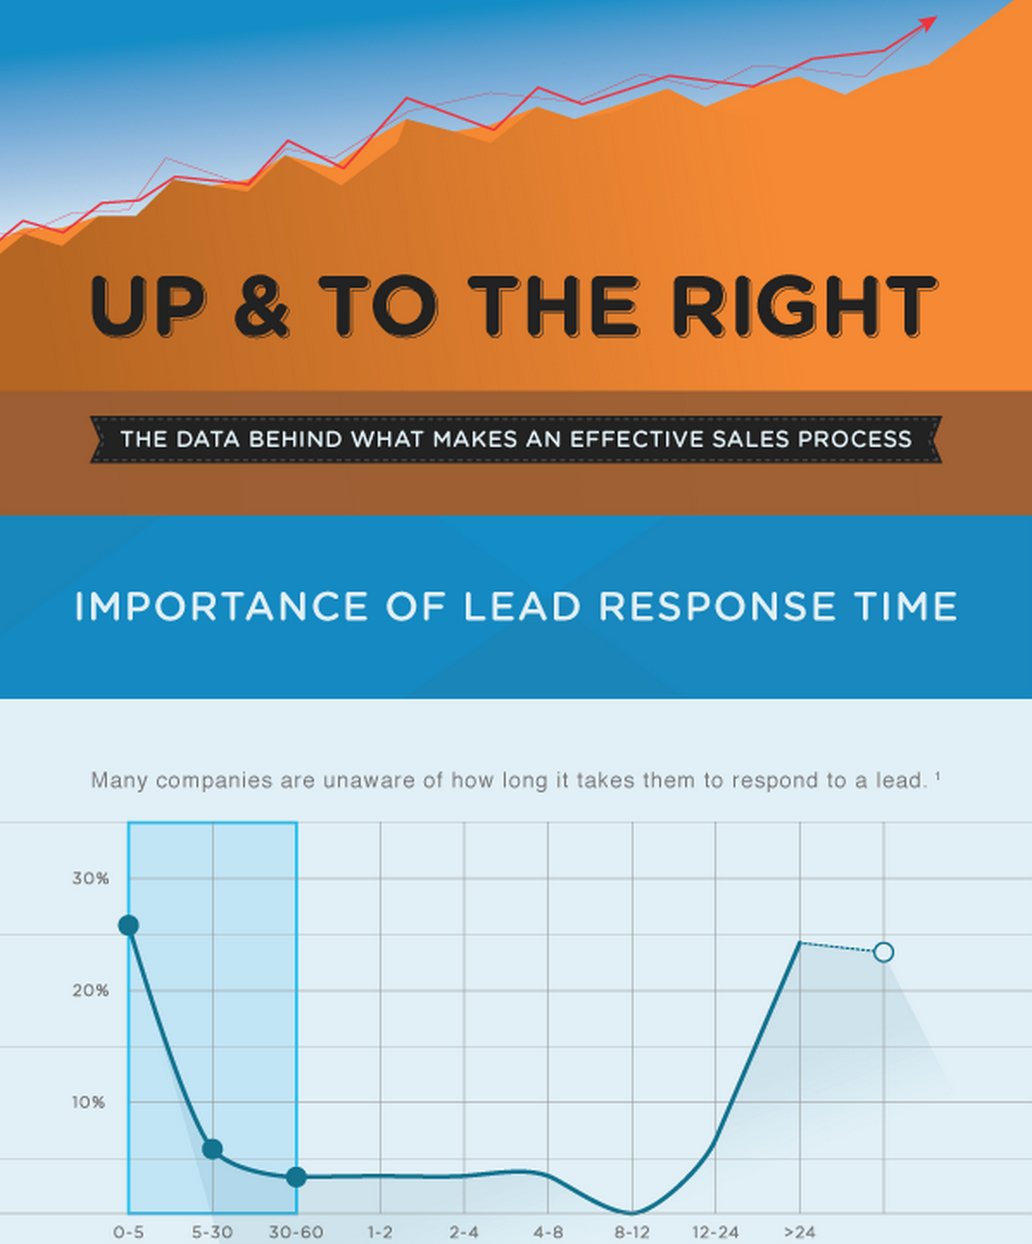 The Data Behind What Makes an Effective Sales Process